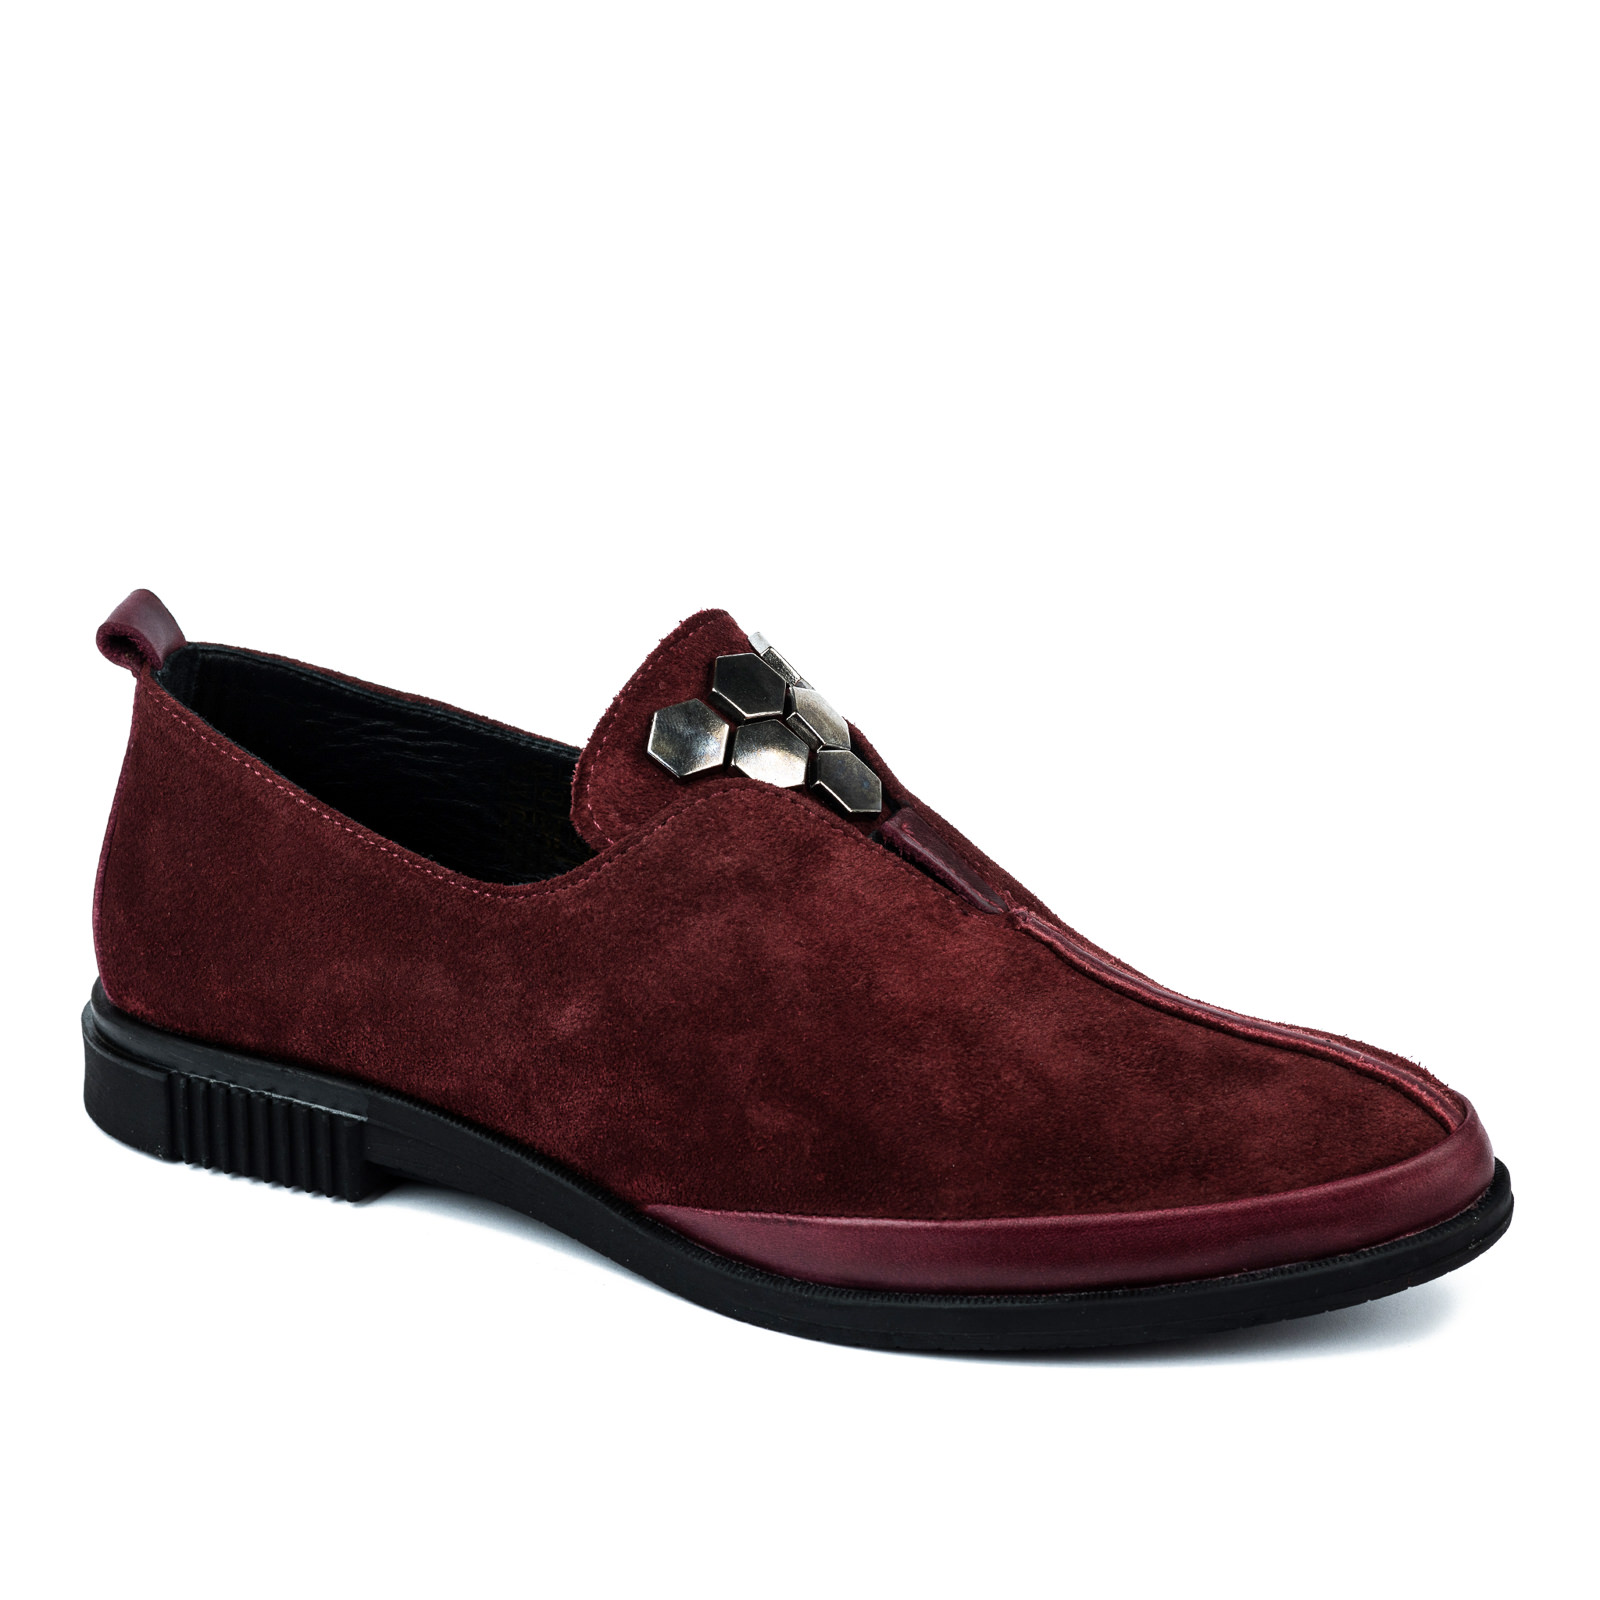 Leather shoes & flats B015 - WINE RED